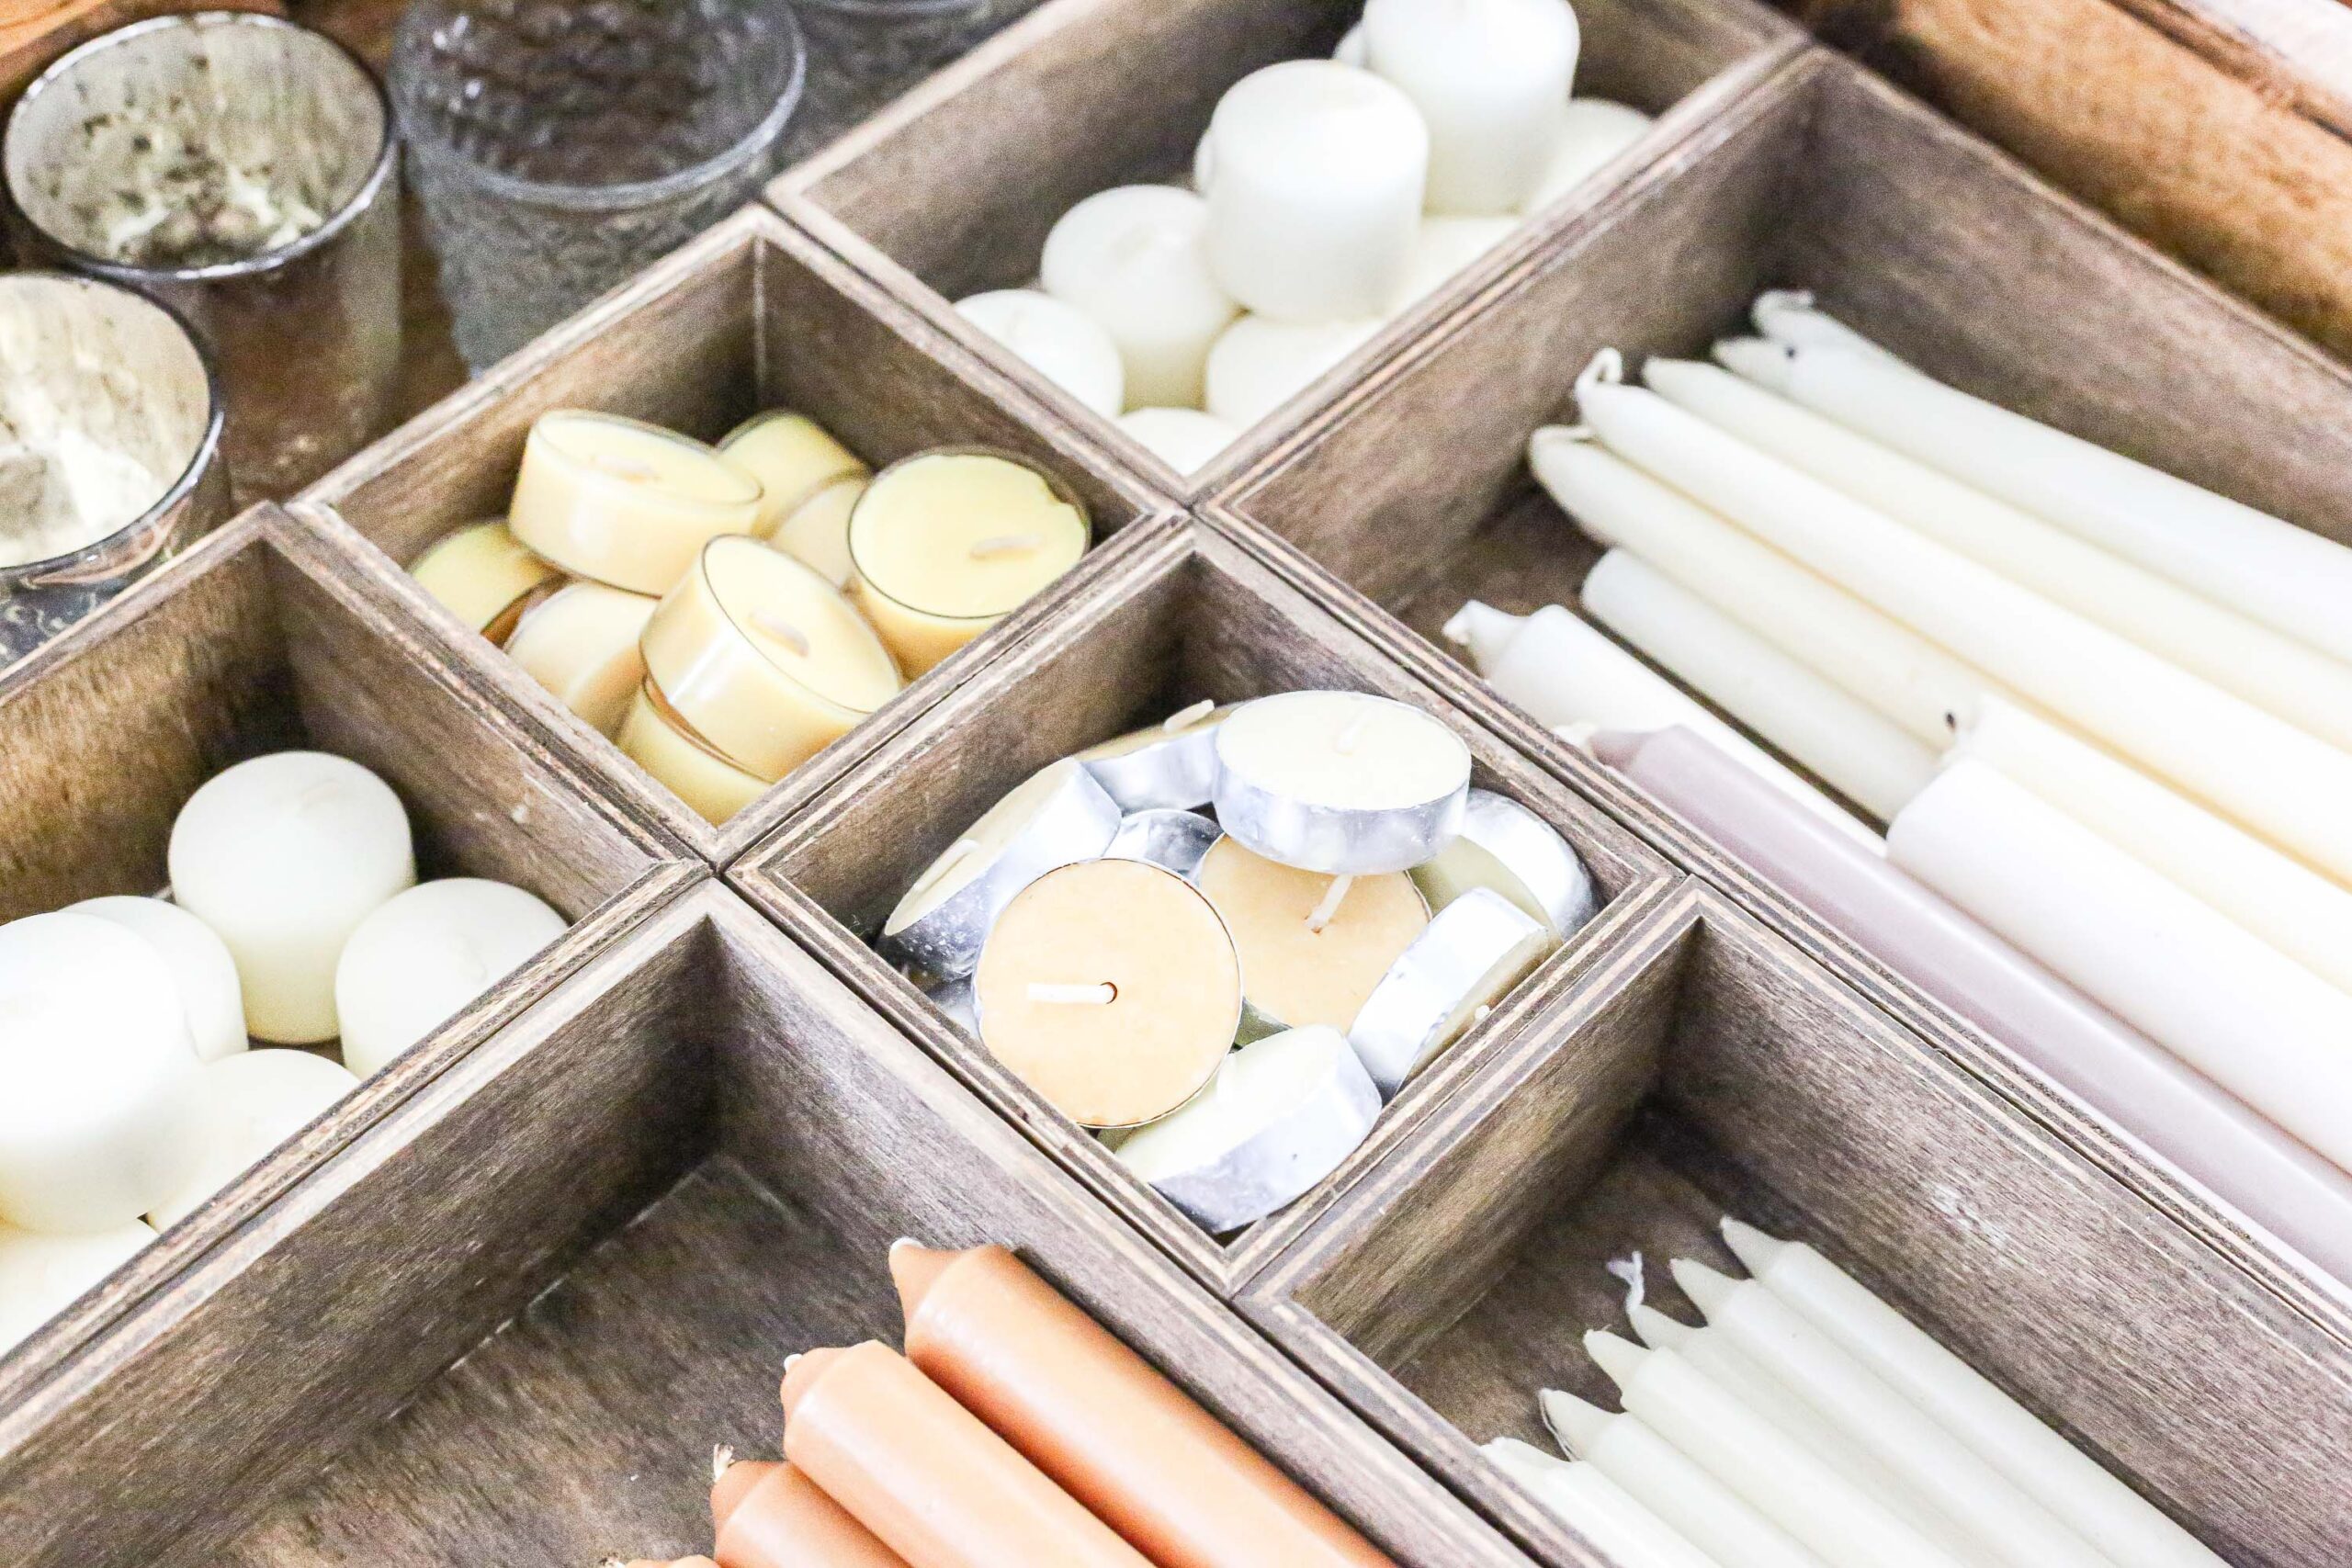 How to Store and Organize Candles